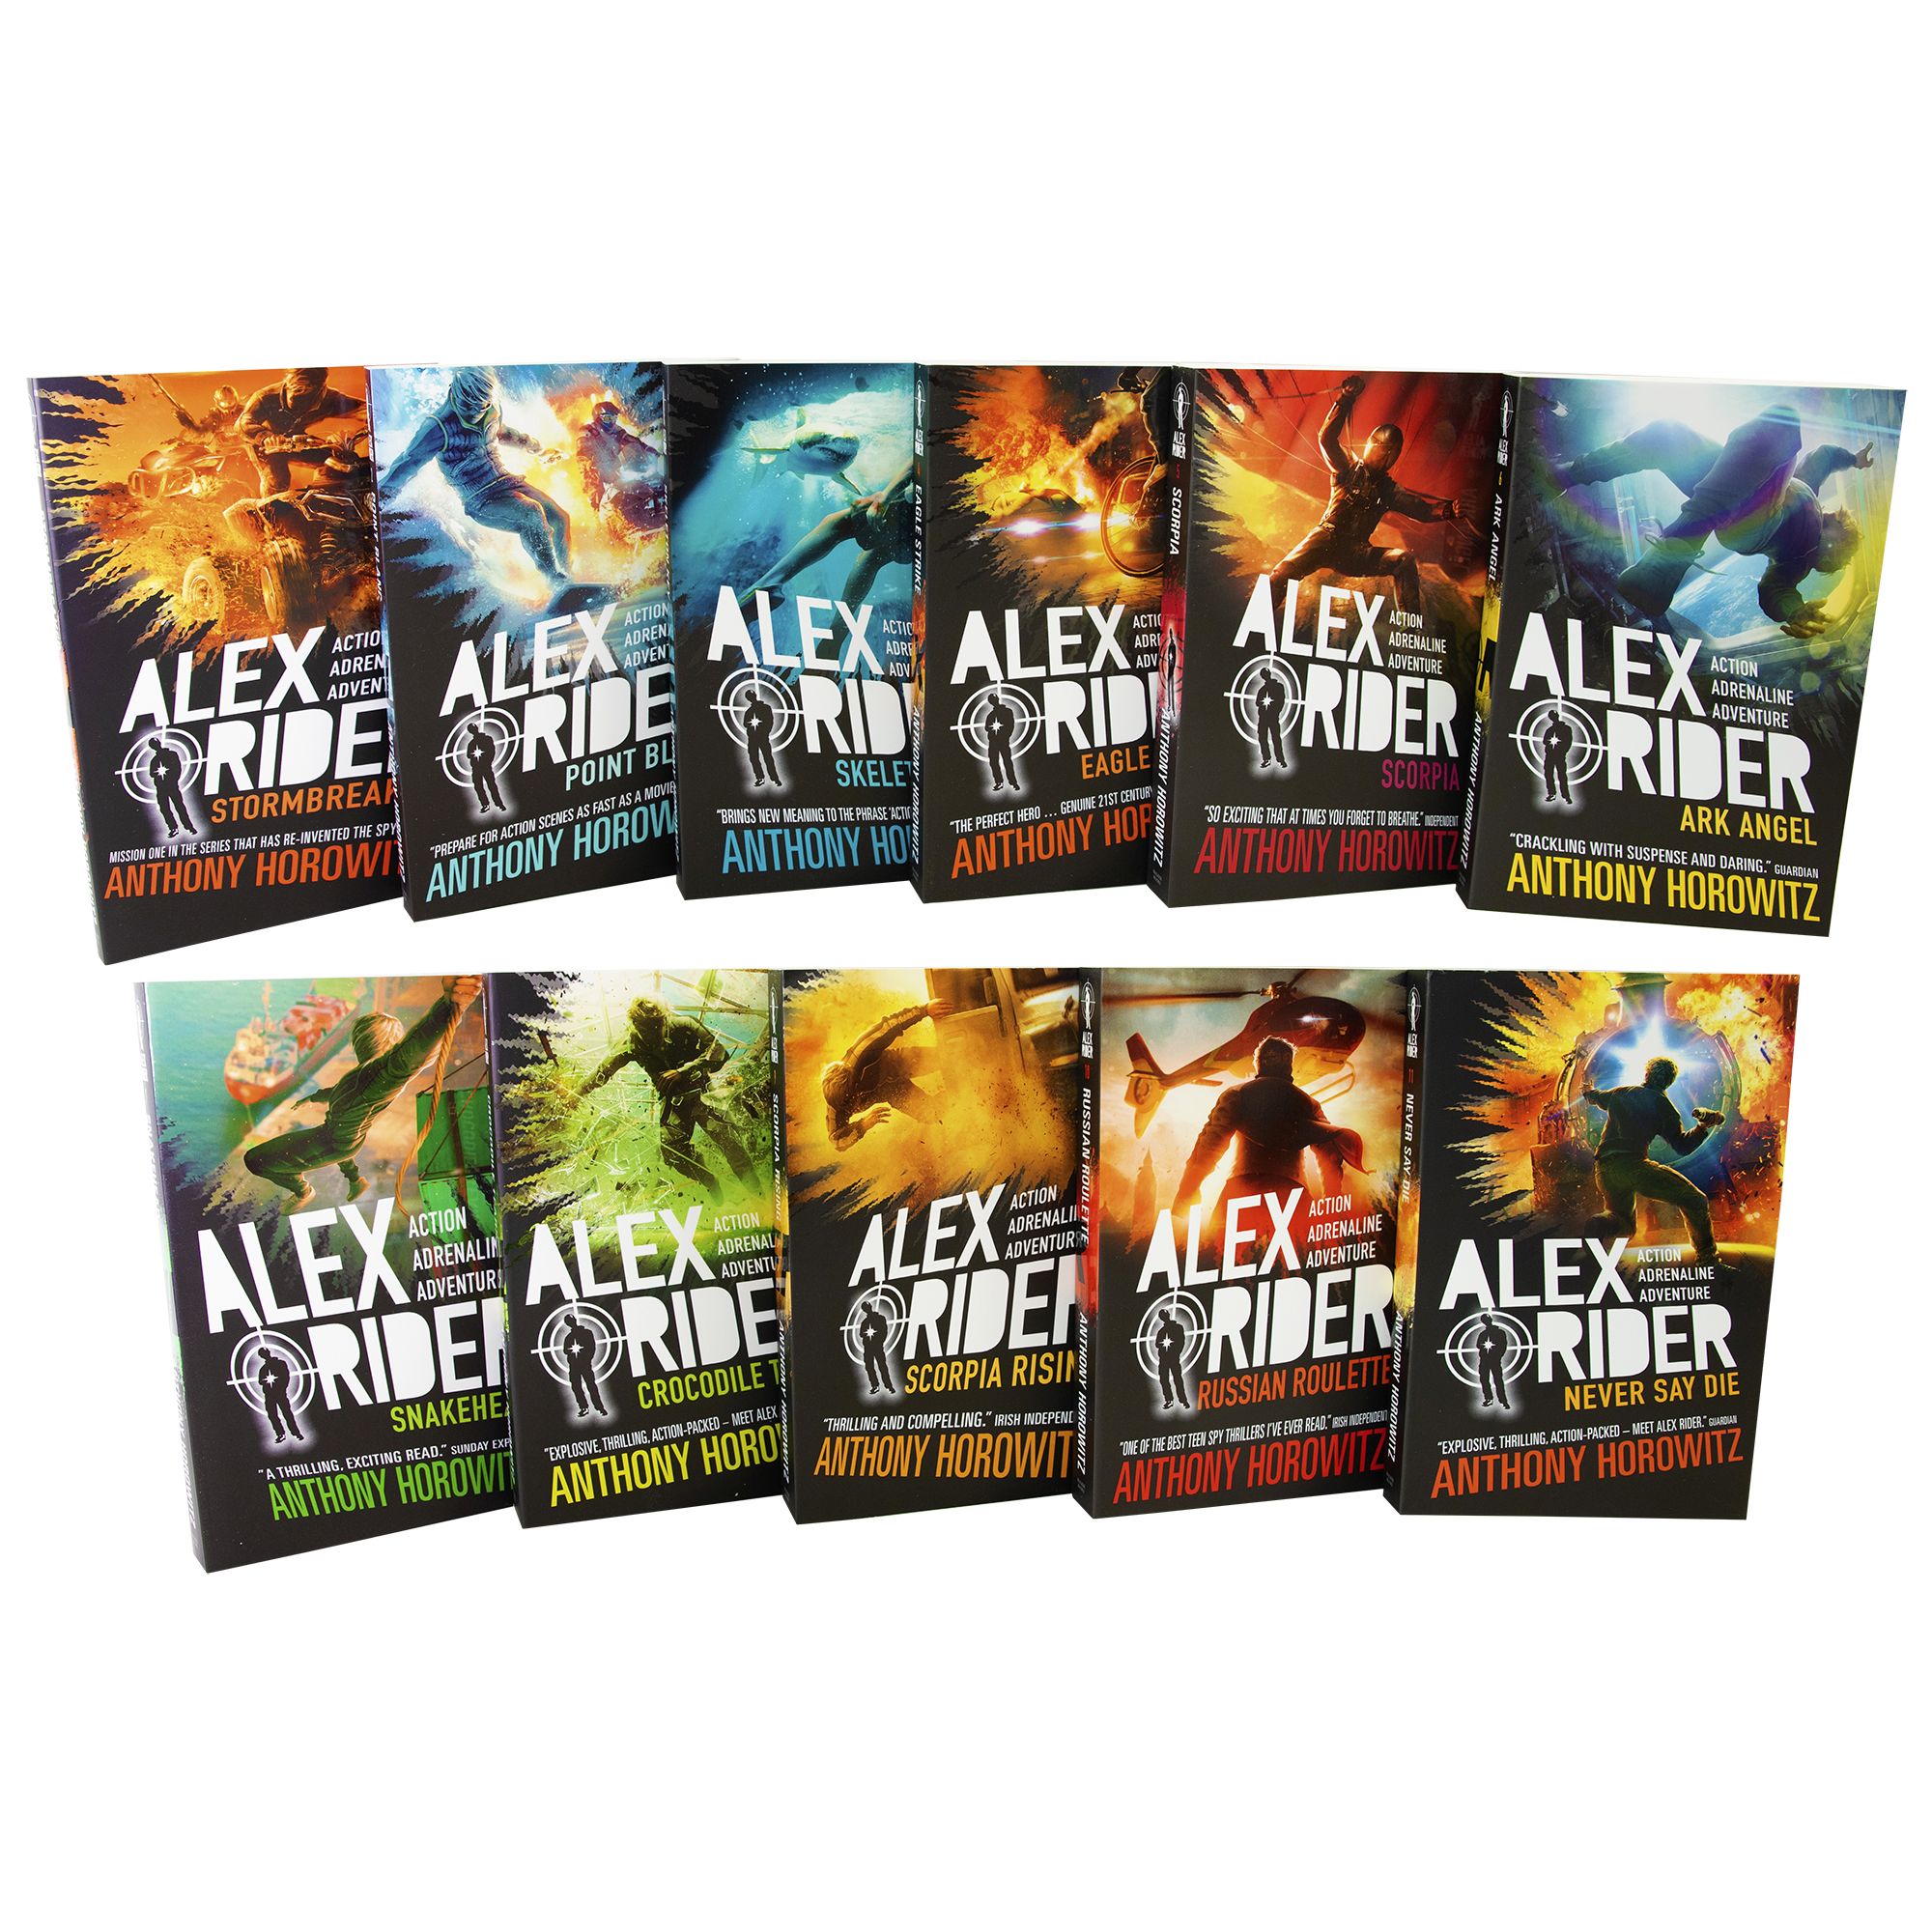 Alex Rider The Complete Missions 11 Books Collection Pack Paperback Set By Anthony Horowitz - St Stephens Books